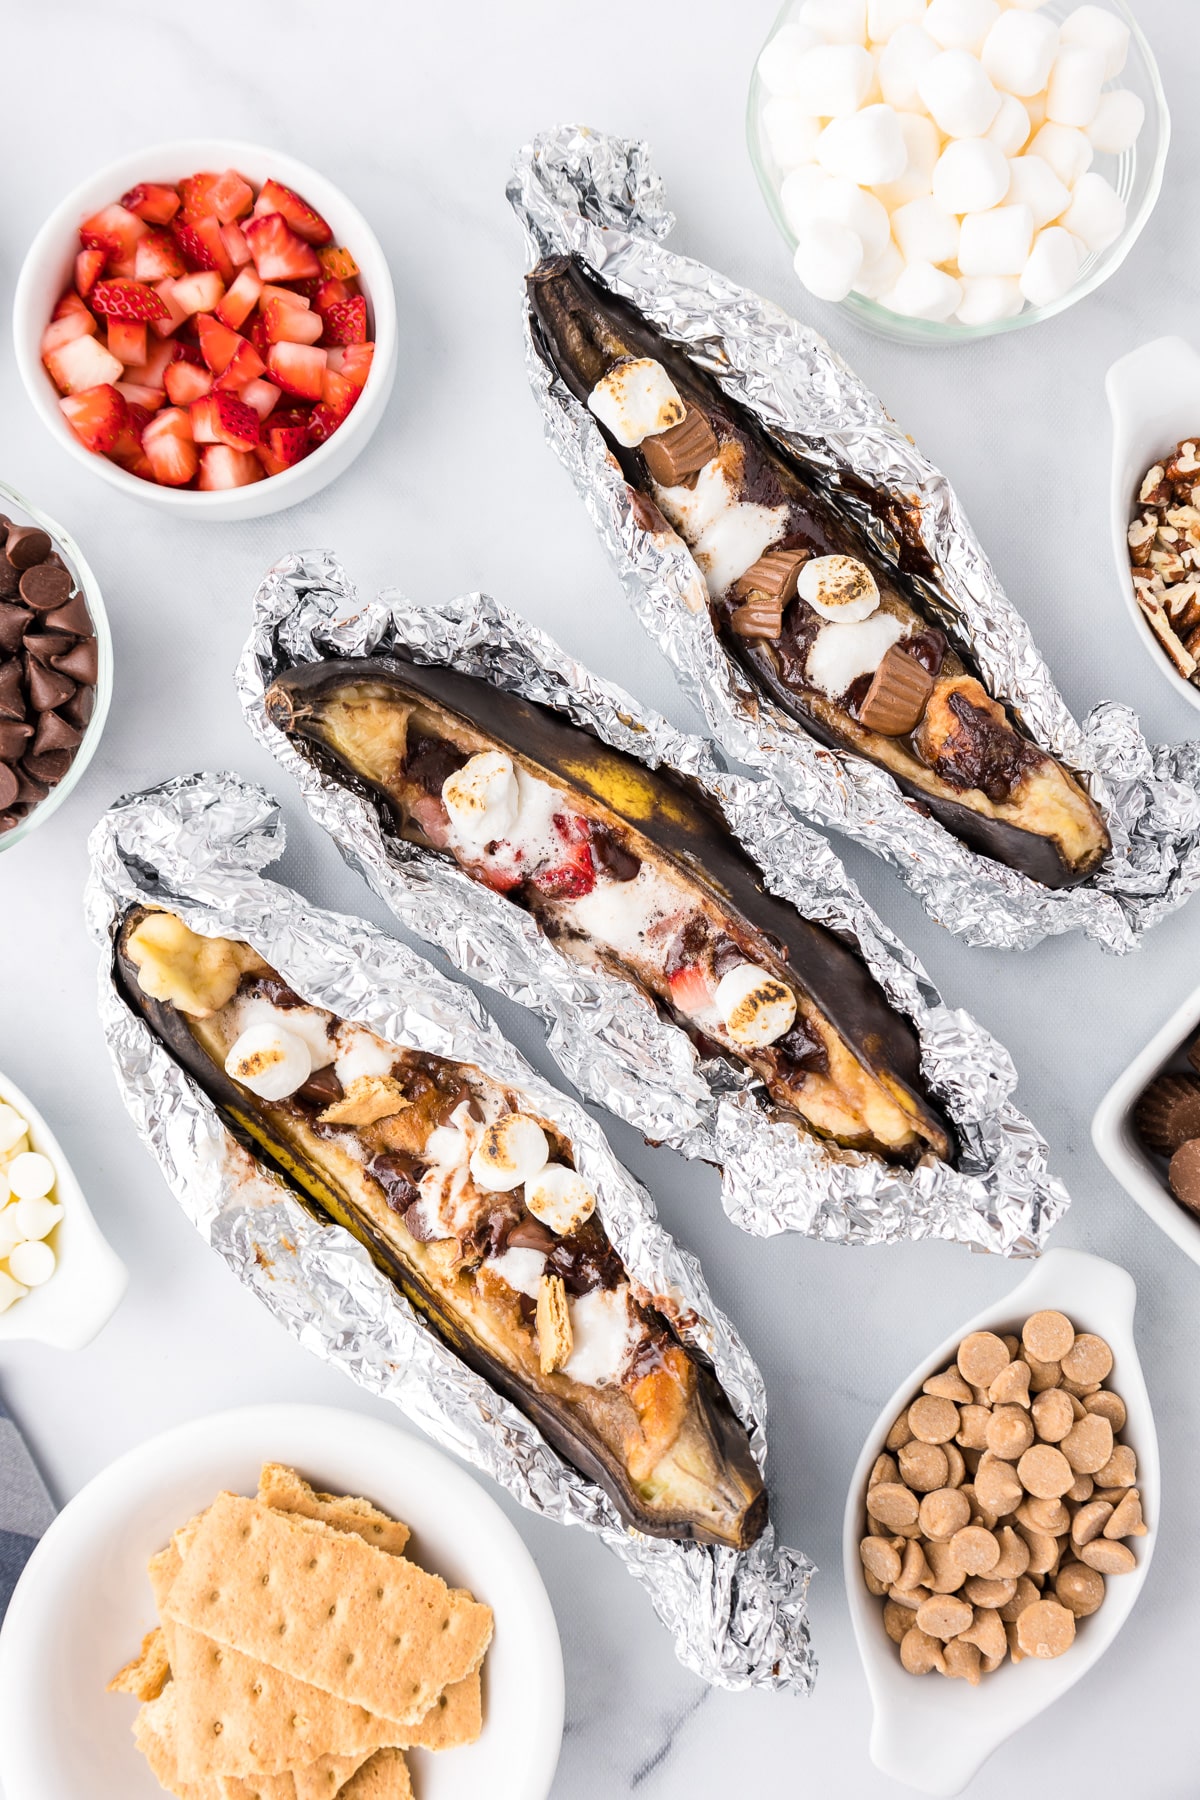 Three cooked bananas stuffed with sweet toppings with aluminum foil peeled back and more toppings around the bananas.